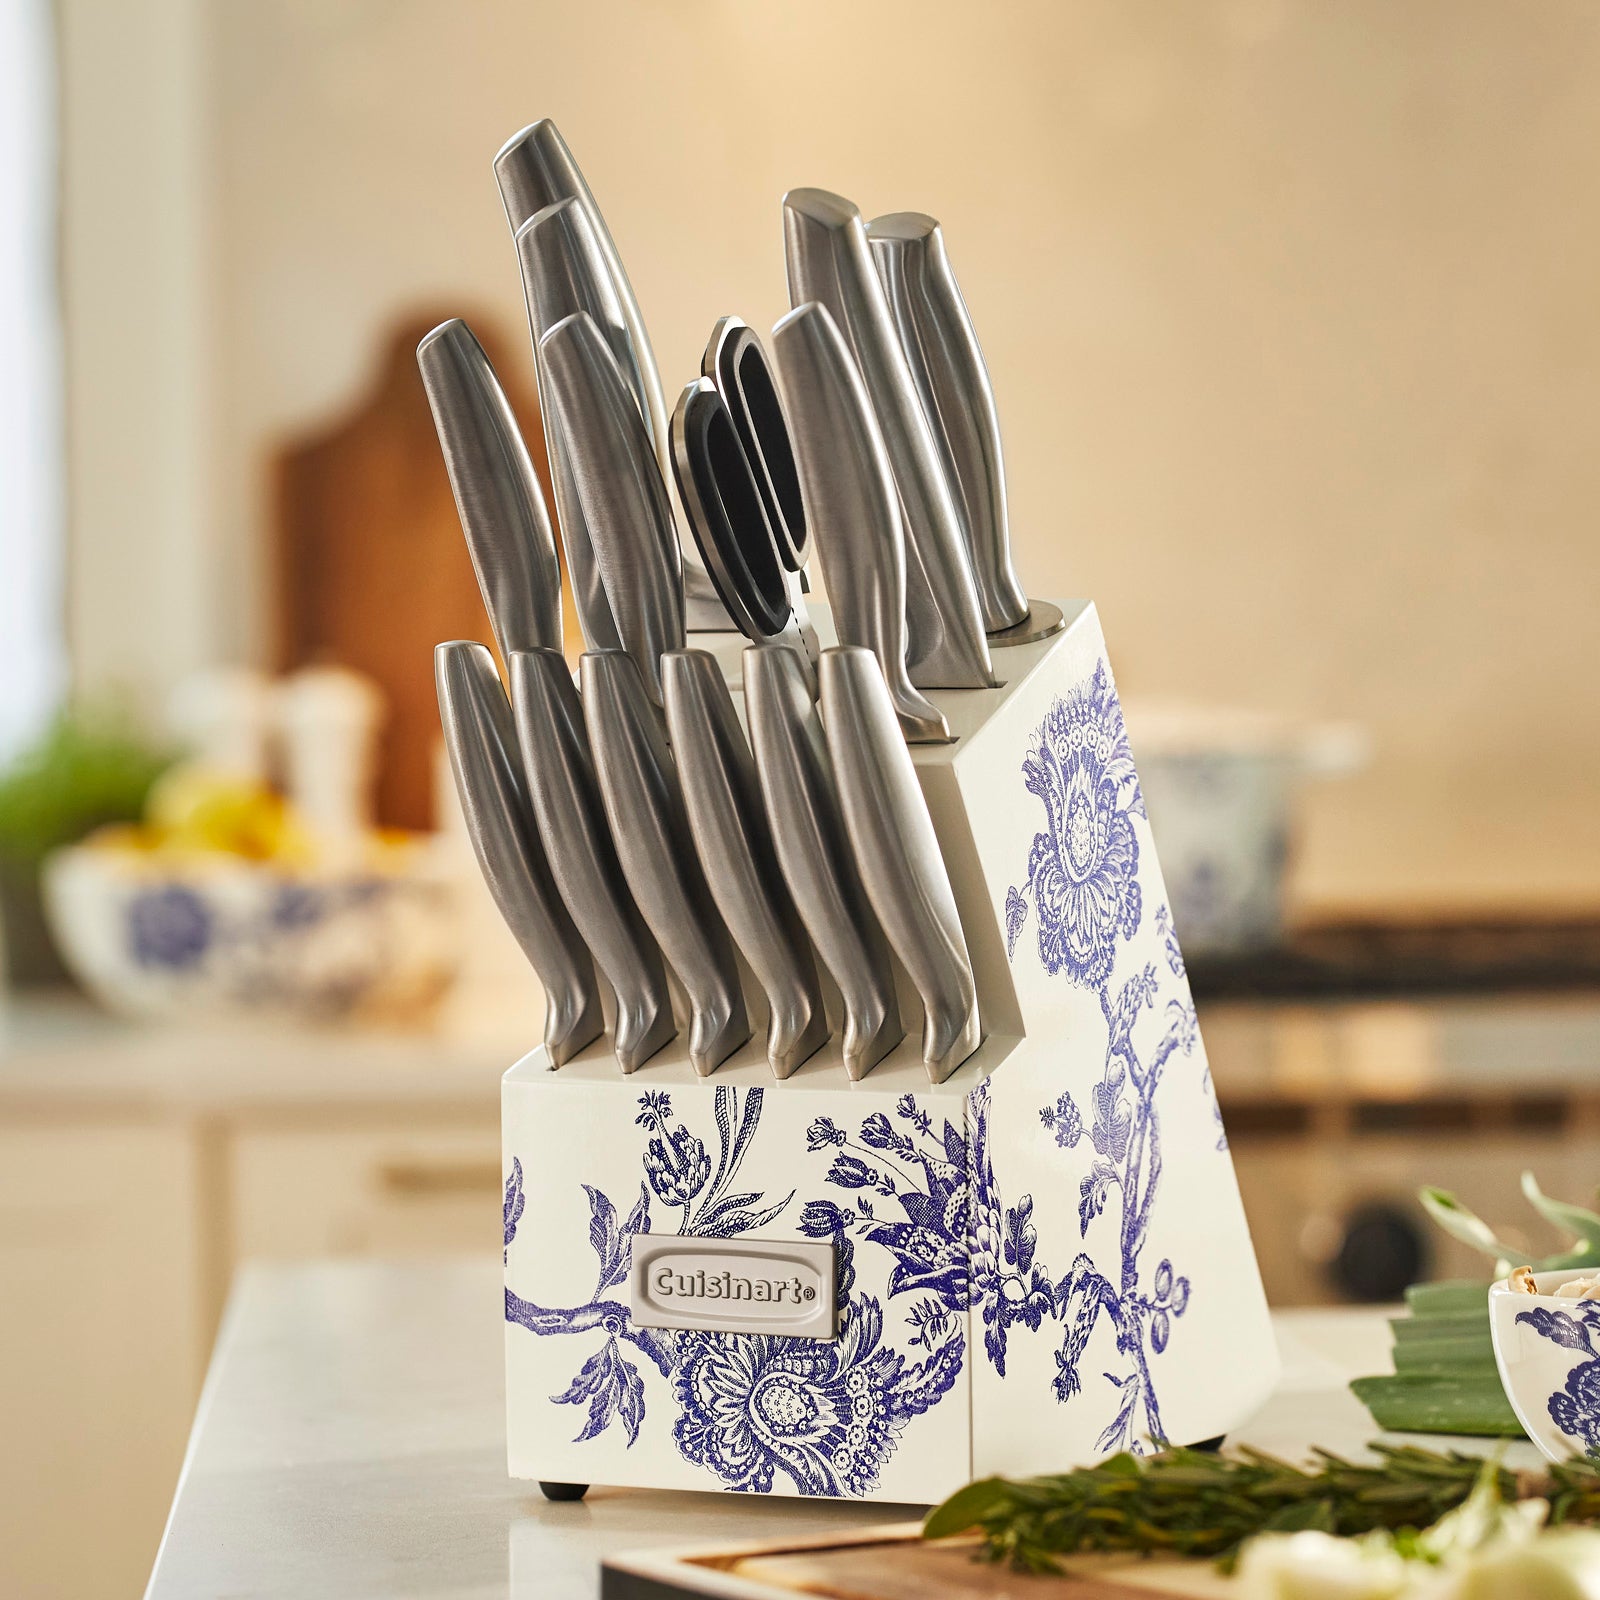 Arcadia Patterned 15 pc. German Stainless Steel Knife Block Set with Engraved Blades from the Caskata X Cuisinart Limited Edition Collection